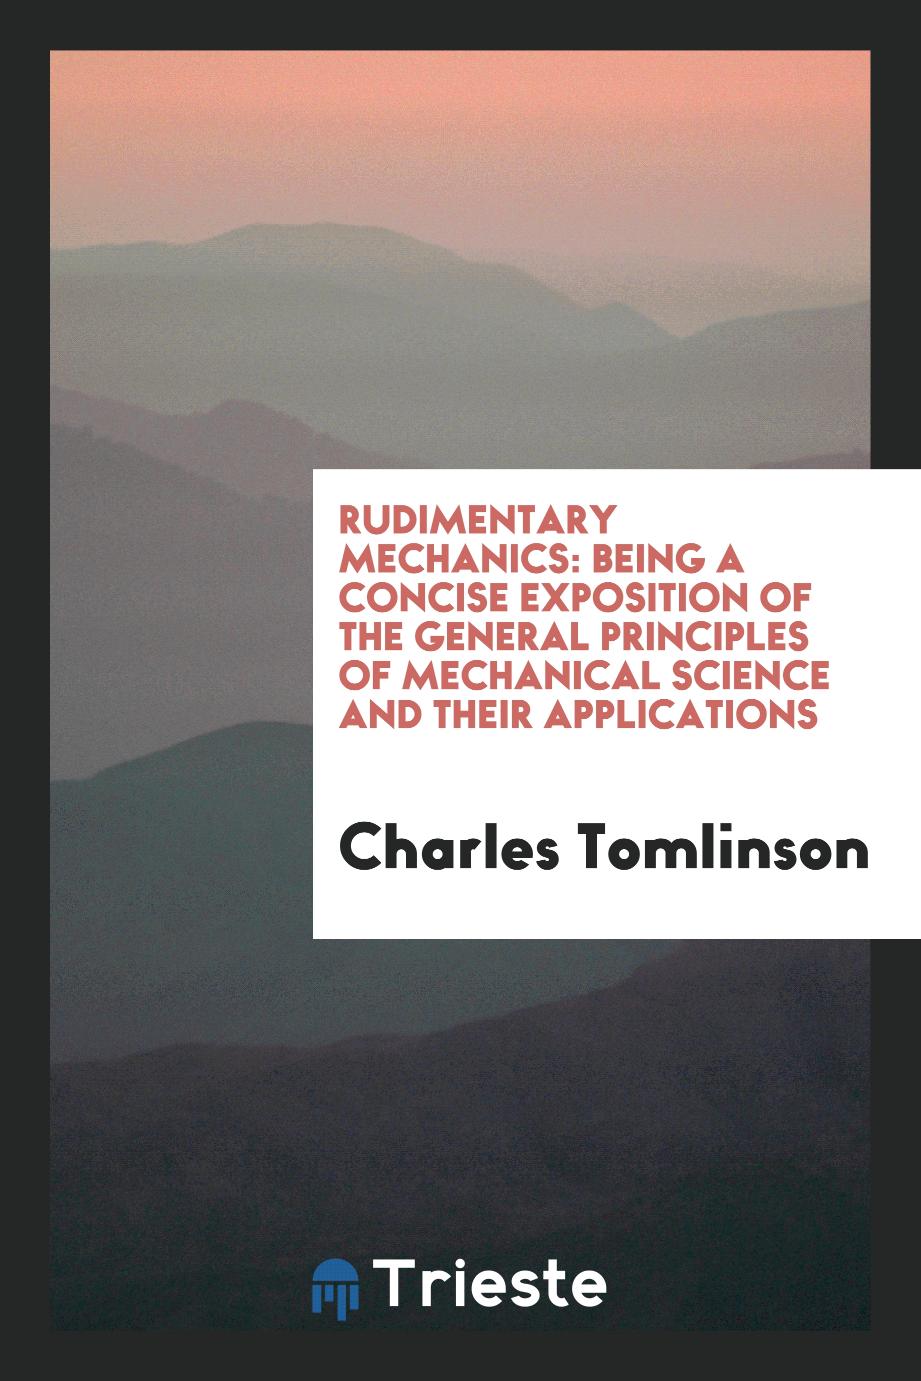 Rudimentary mechanics: being a concise exposition of the general principles of mechanical science and their applications